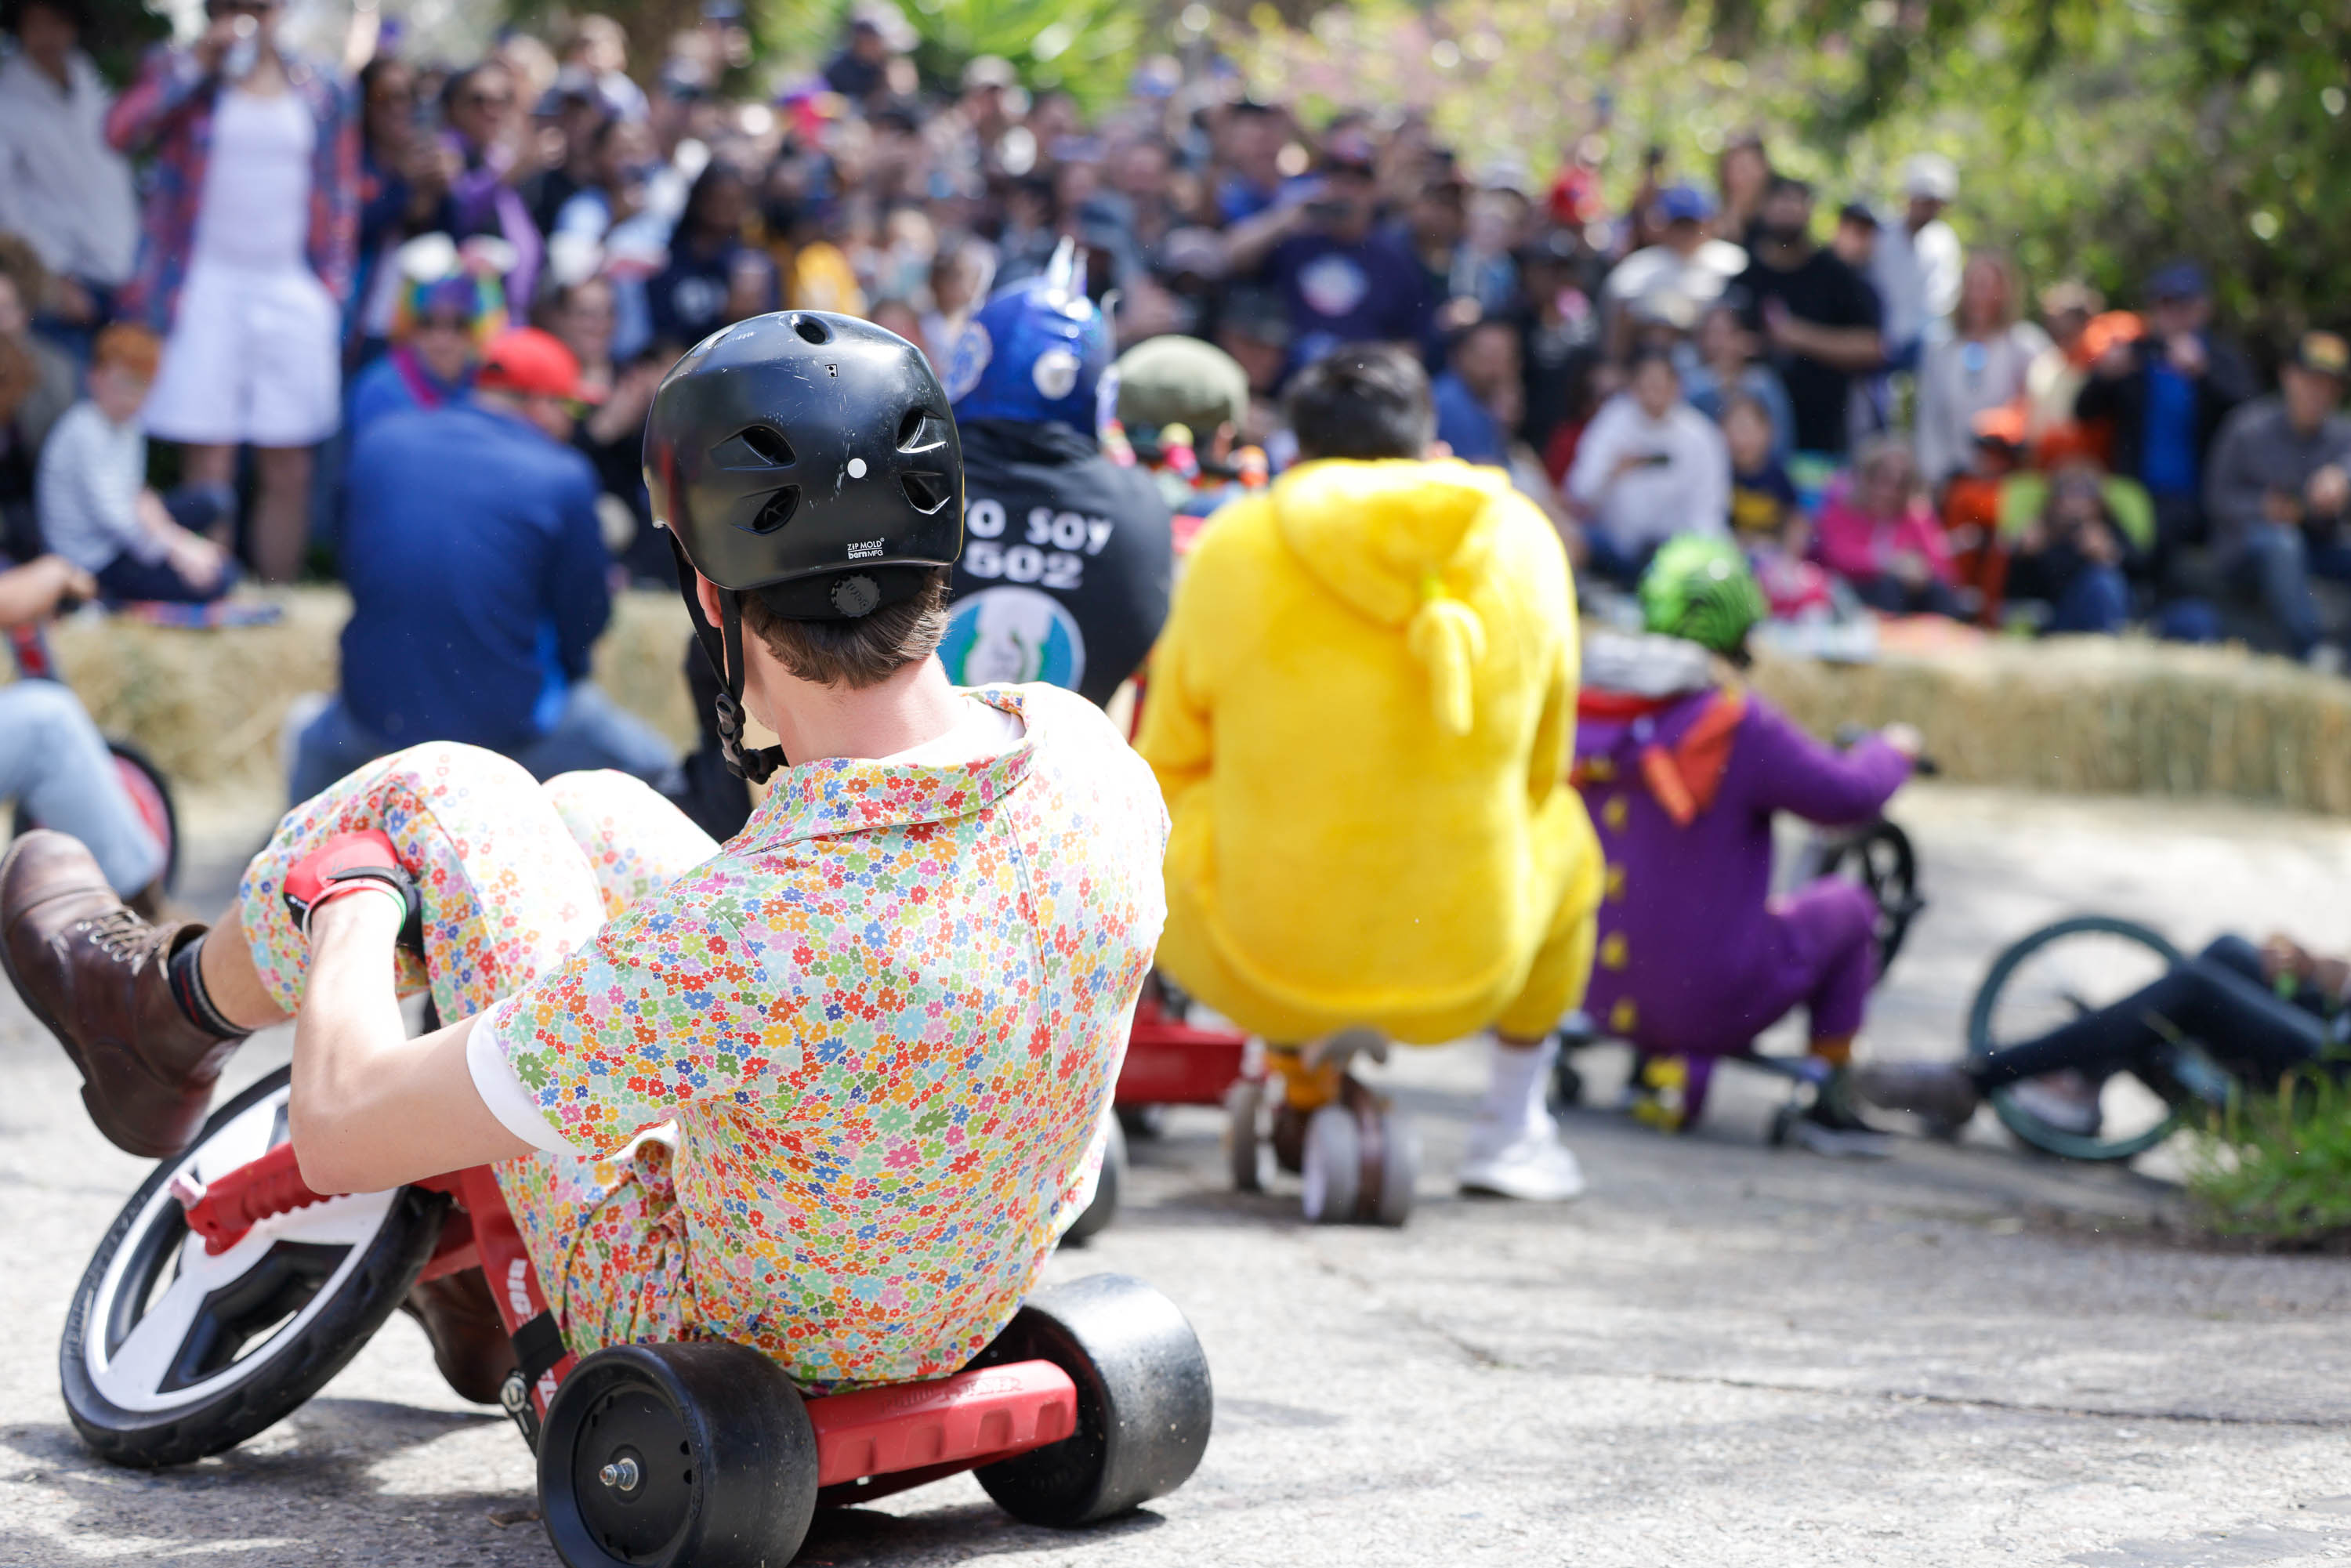 People in costumes race on toy tricycles before a watching crowd.